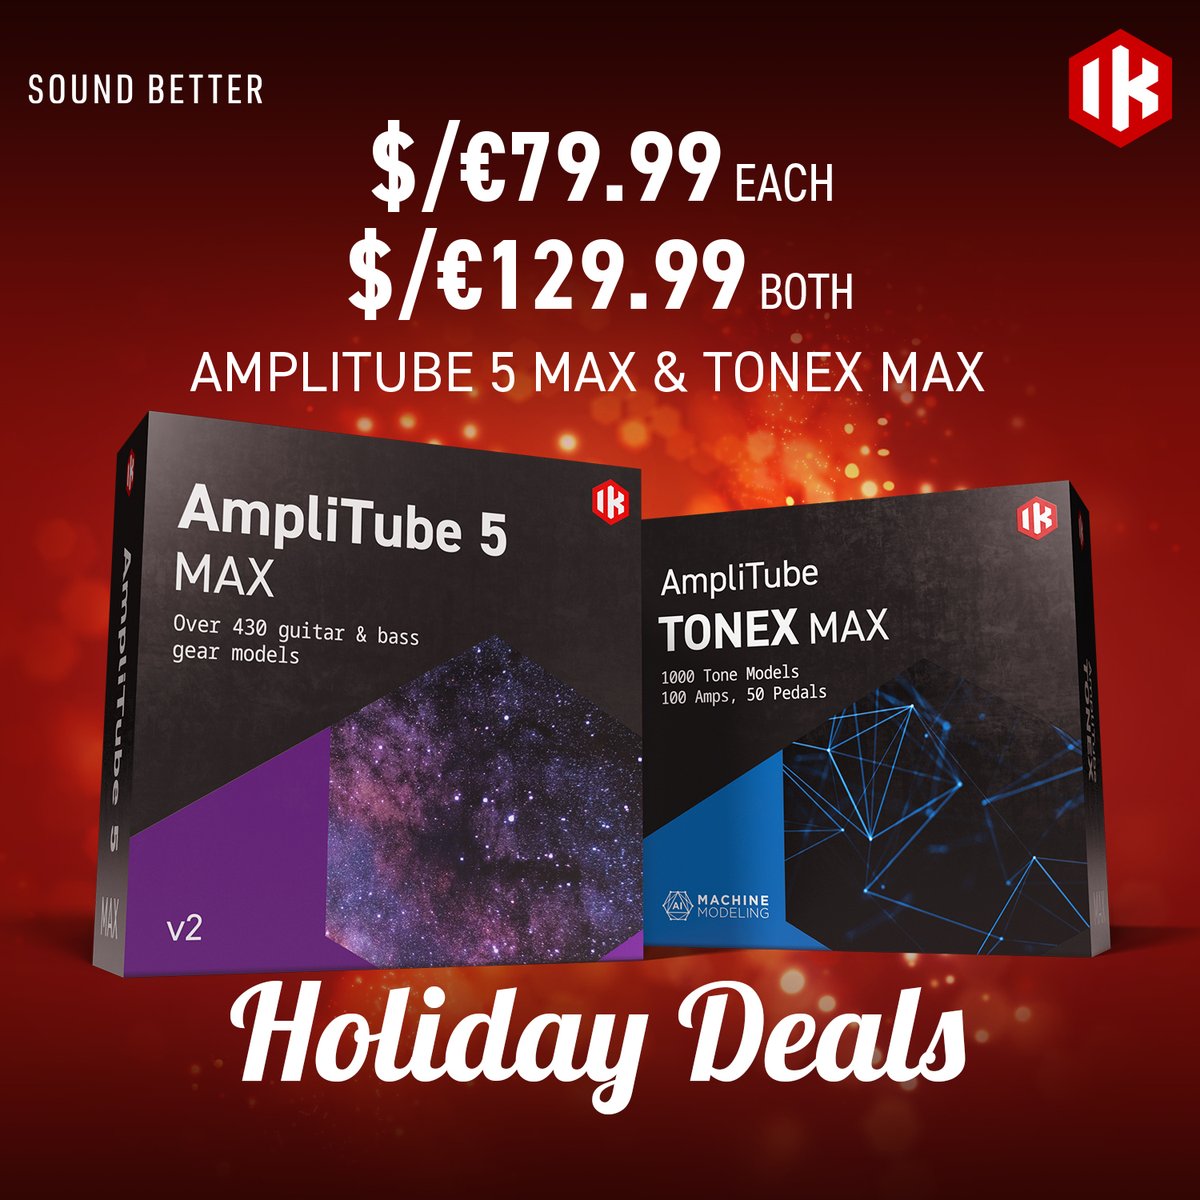 Don't miss your chance to revolutionize your guitar experience at our lowest prices of the year. Sales end January 1st! bit.ly/holidealsmaxgu…